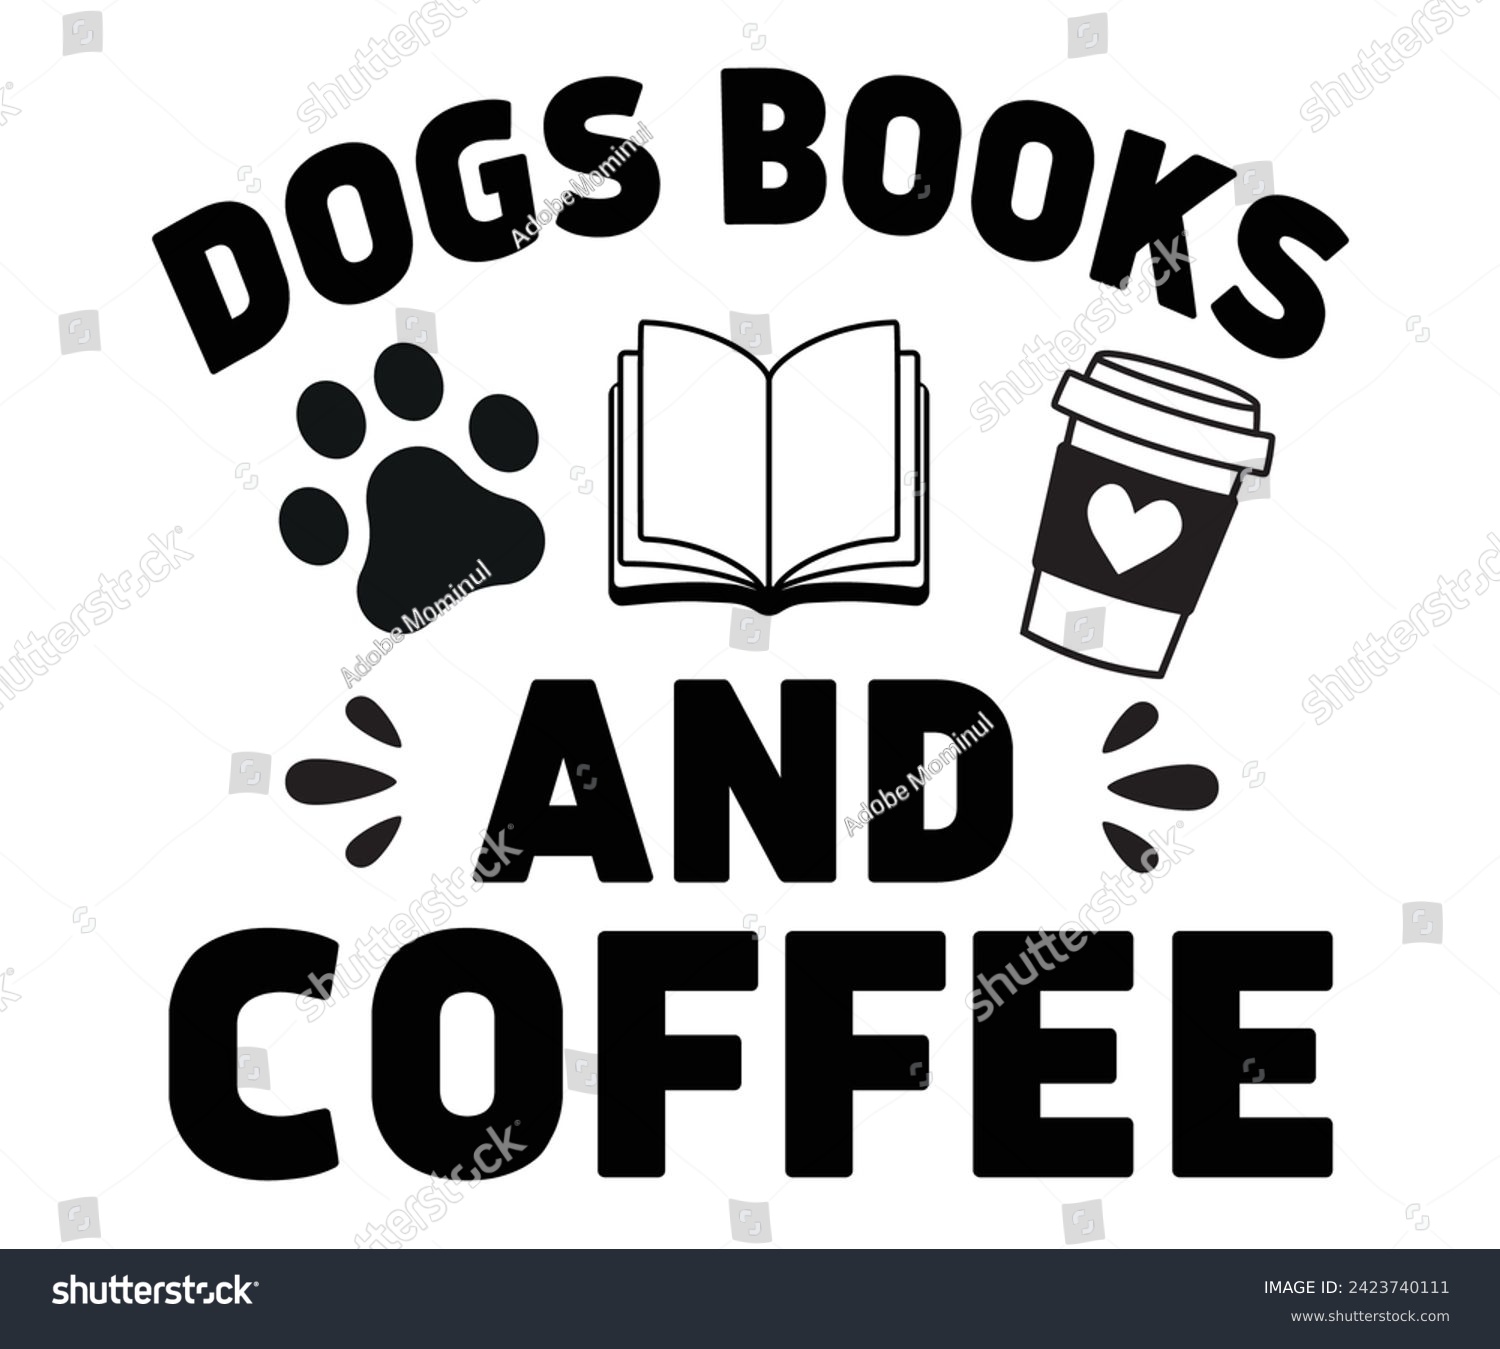 SVG of Dogs Books And Coffee,Coffee Svg,Coffee Retro,Funny Coffee Sayings,Coffee Mug Svg,Coffee Cup Svg,Gift For Coffee,Coffee Lover,Caffeine Svg,Svg Cut File,Coffee Quotes,Sublimation Design, svg